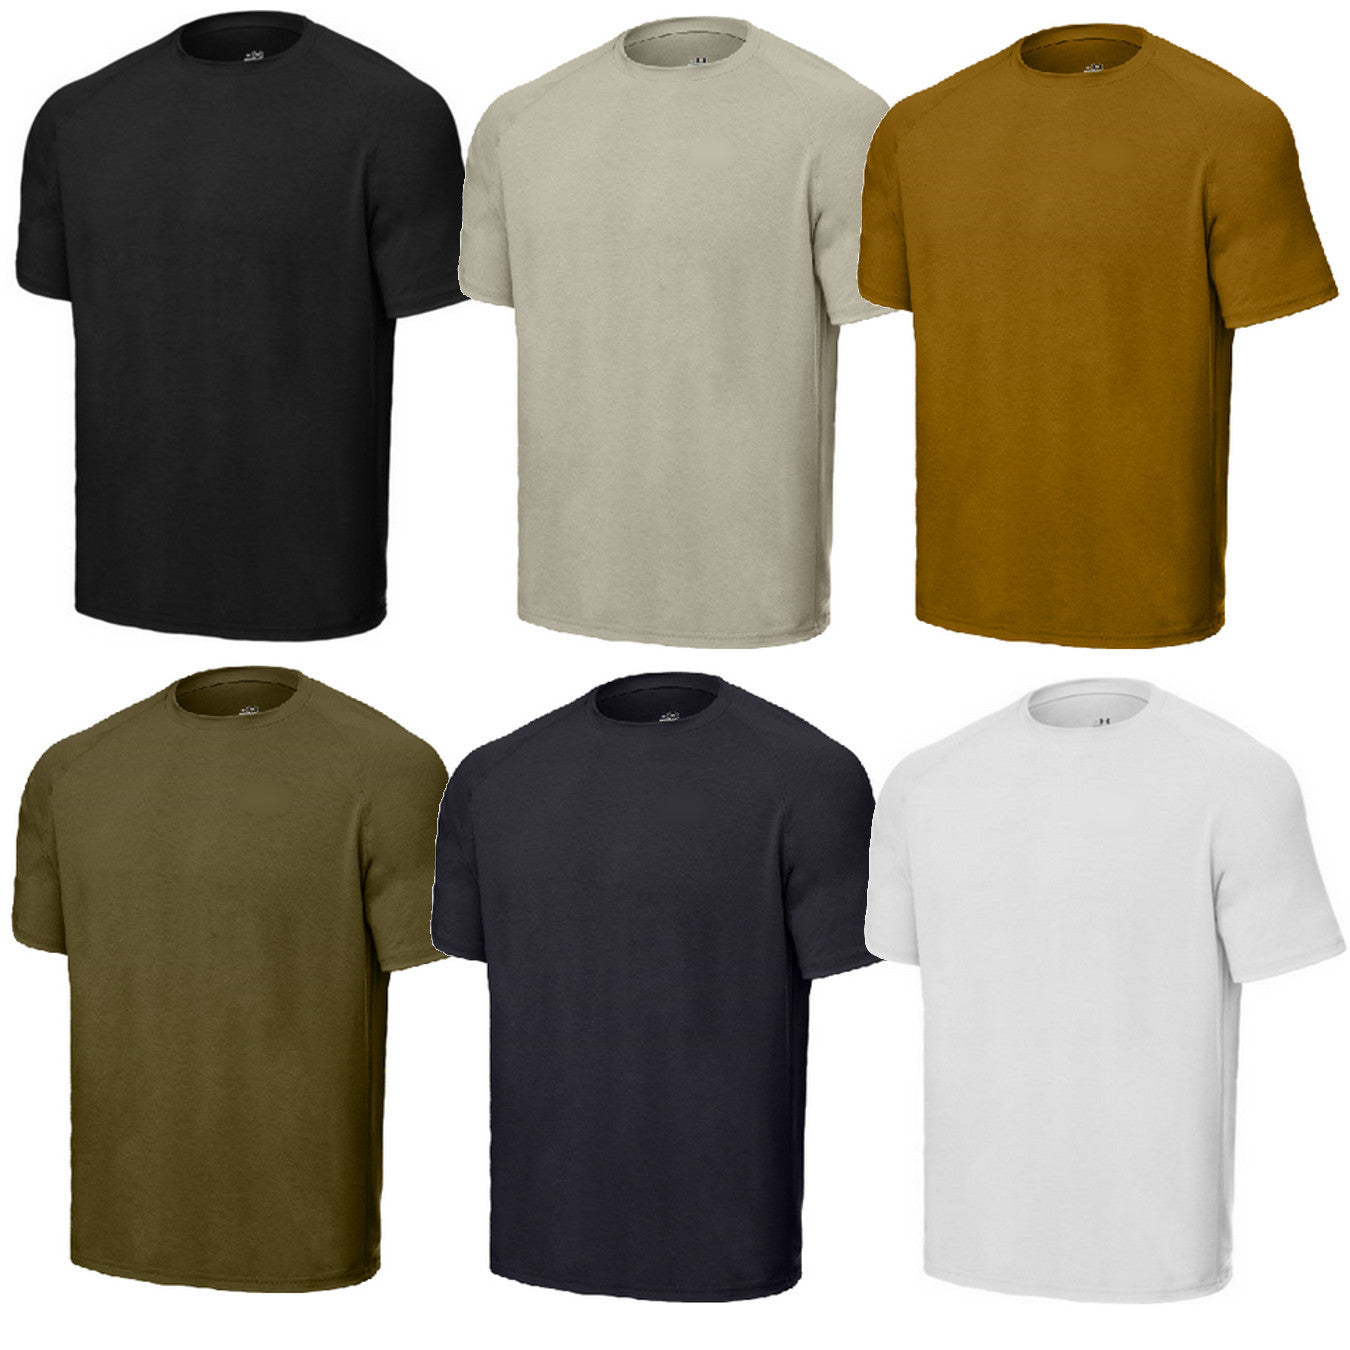 ROTHCO Athletic Fit Solid Color Military T-Shirt COYOTE BROWN